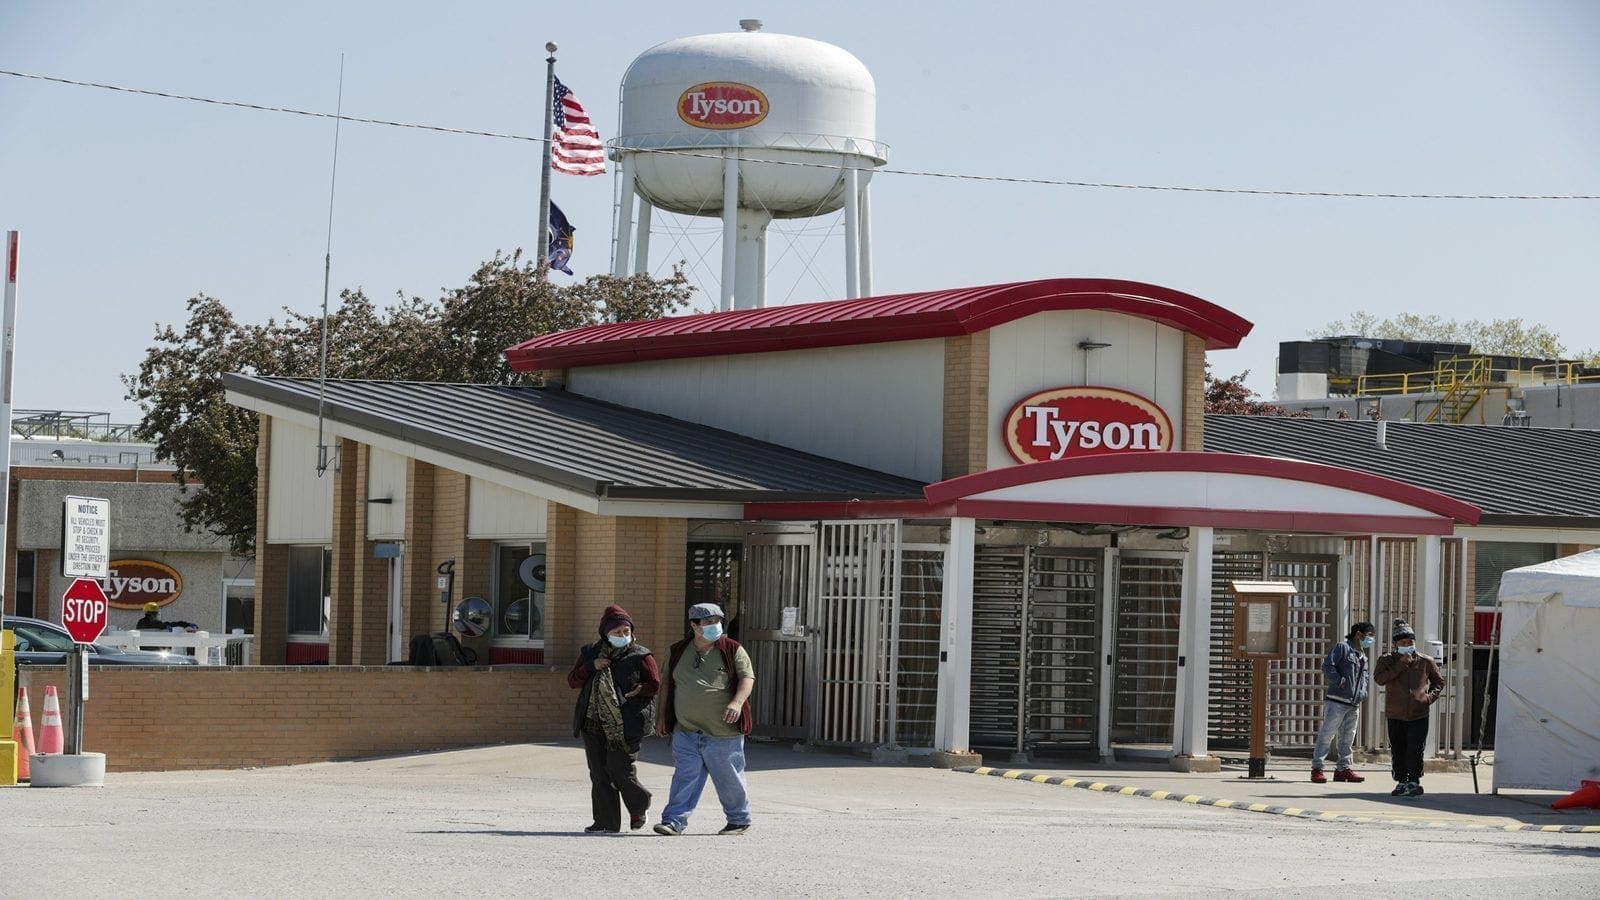 Tyson Foods invests US$355m in new bacon facility to meet soaring demand for proteins